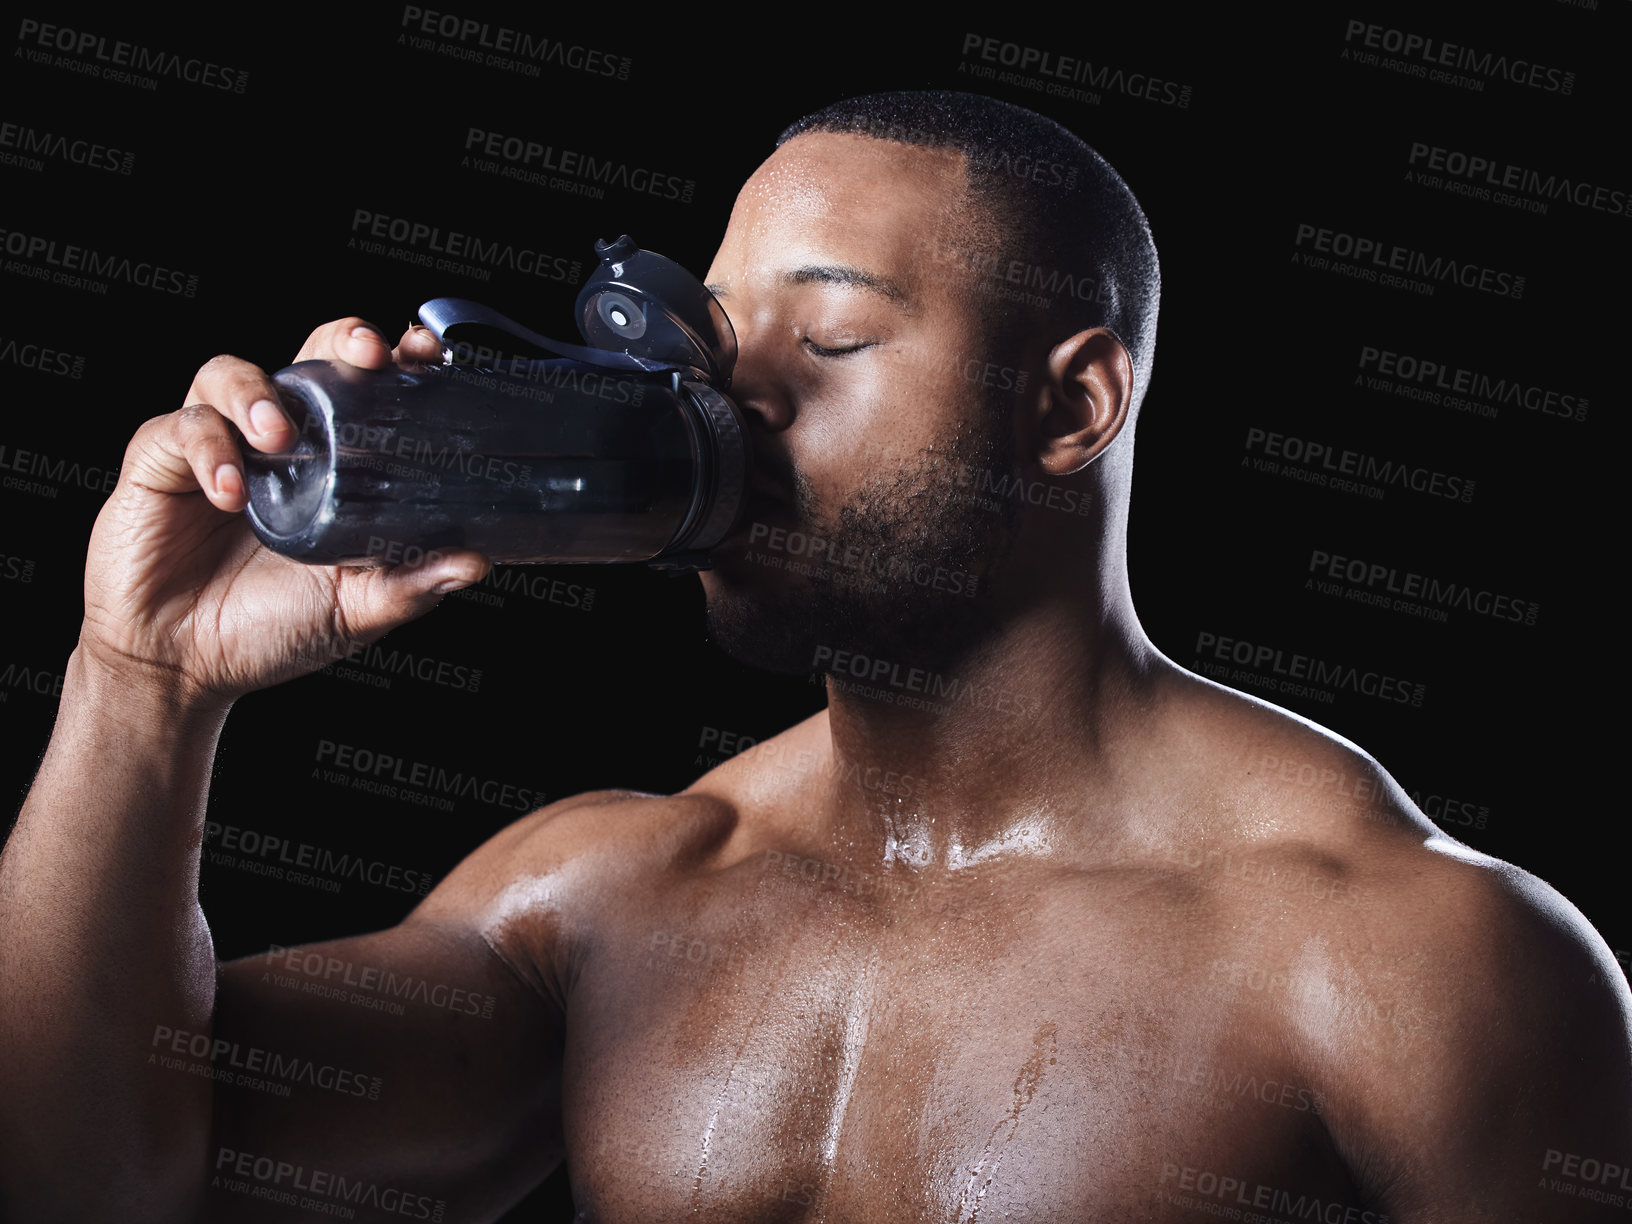 Buy stock photo Studio shot of a young fit man drinking water after exercising against a black background